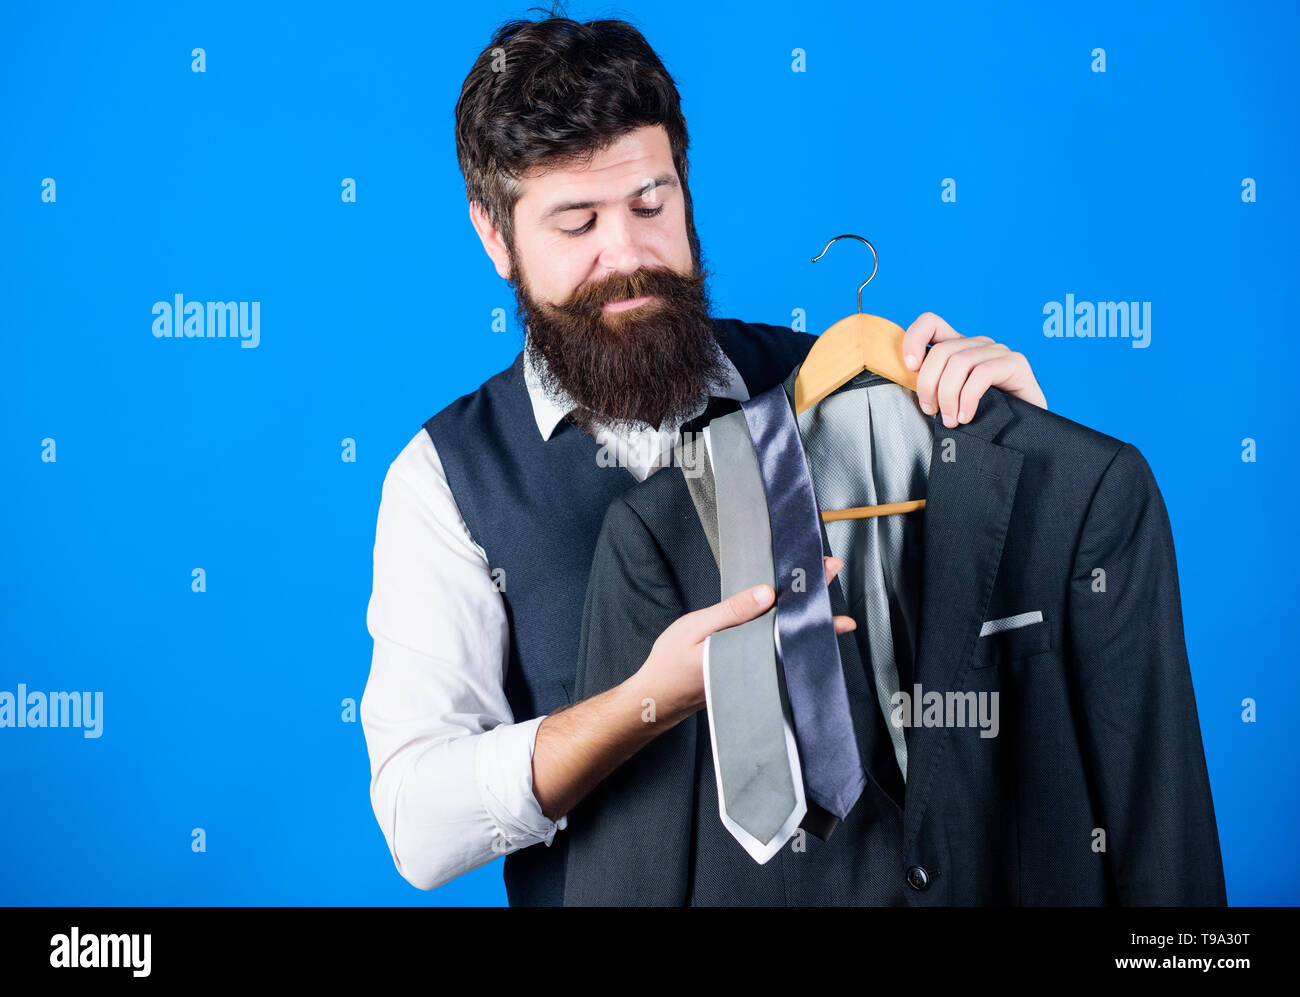 Shop assistant or personal stylist service. Stylist advice. Matching  necktie with outfit. Man bearded hipster hold neckties and formal suit. Guy  choosing necktie. Perfect necktie. Shopping concept Stock Photo - Alamy